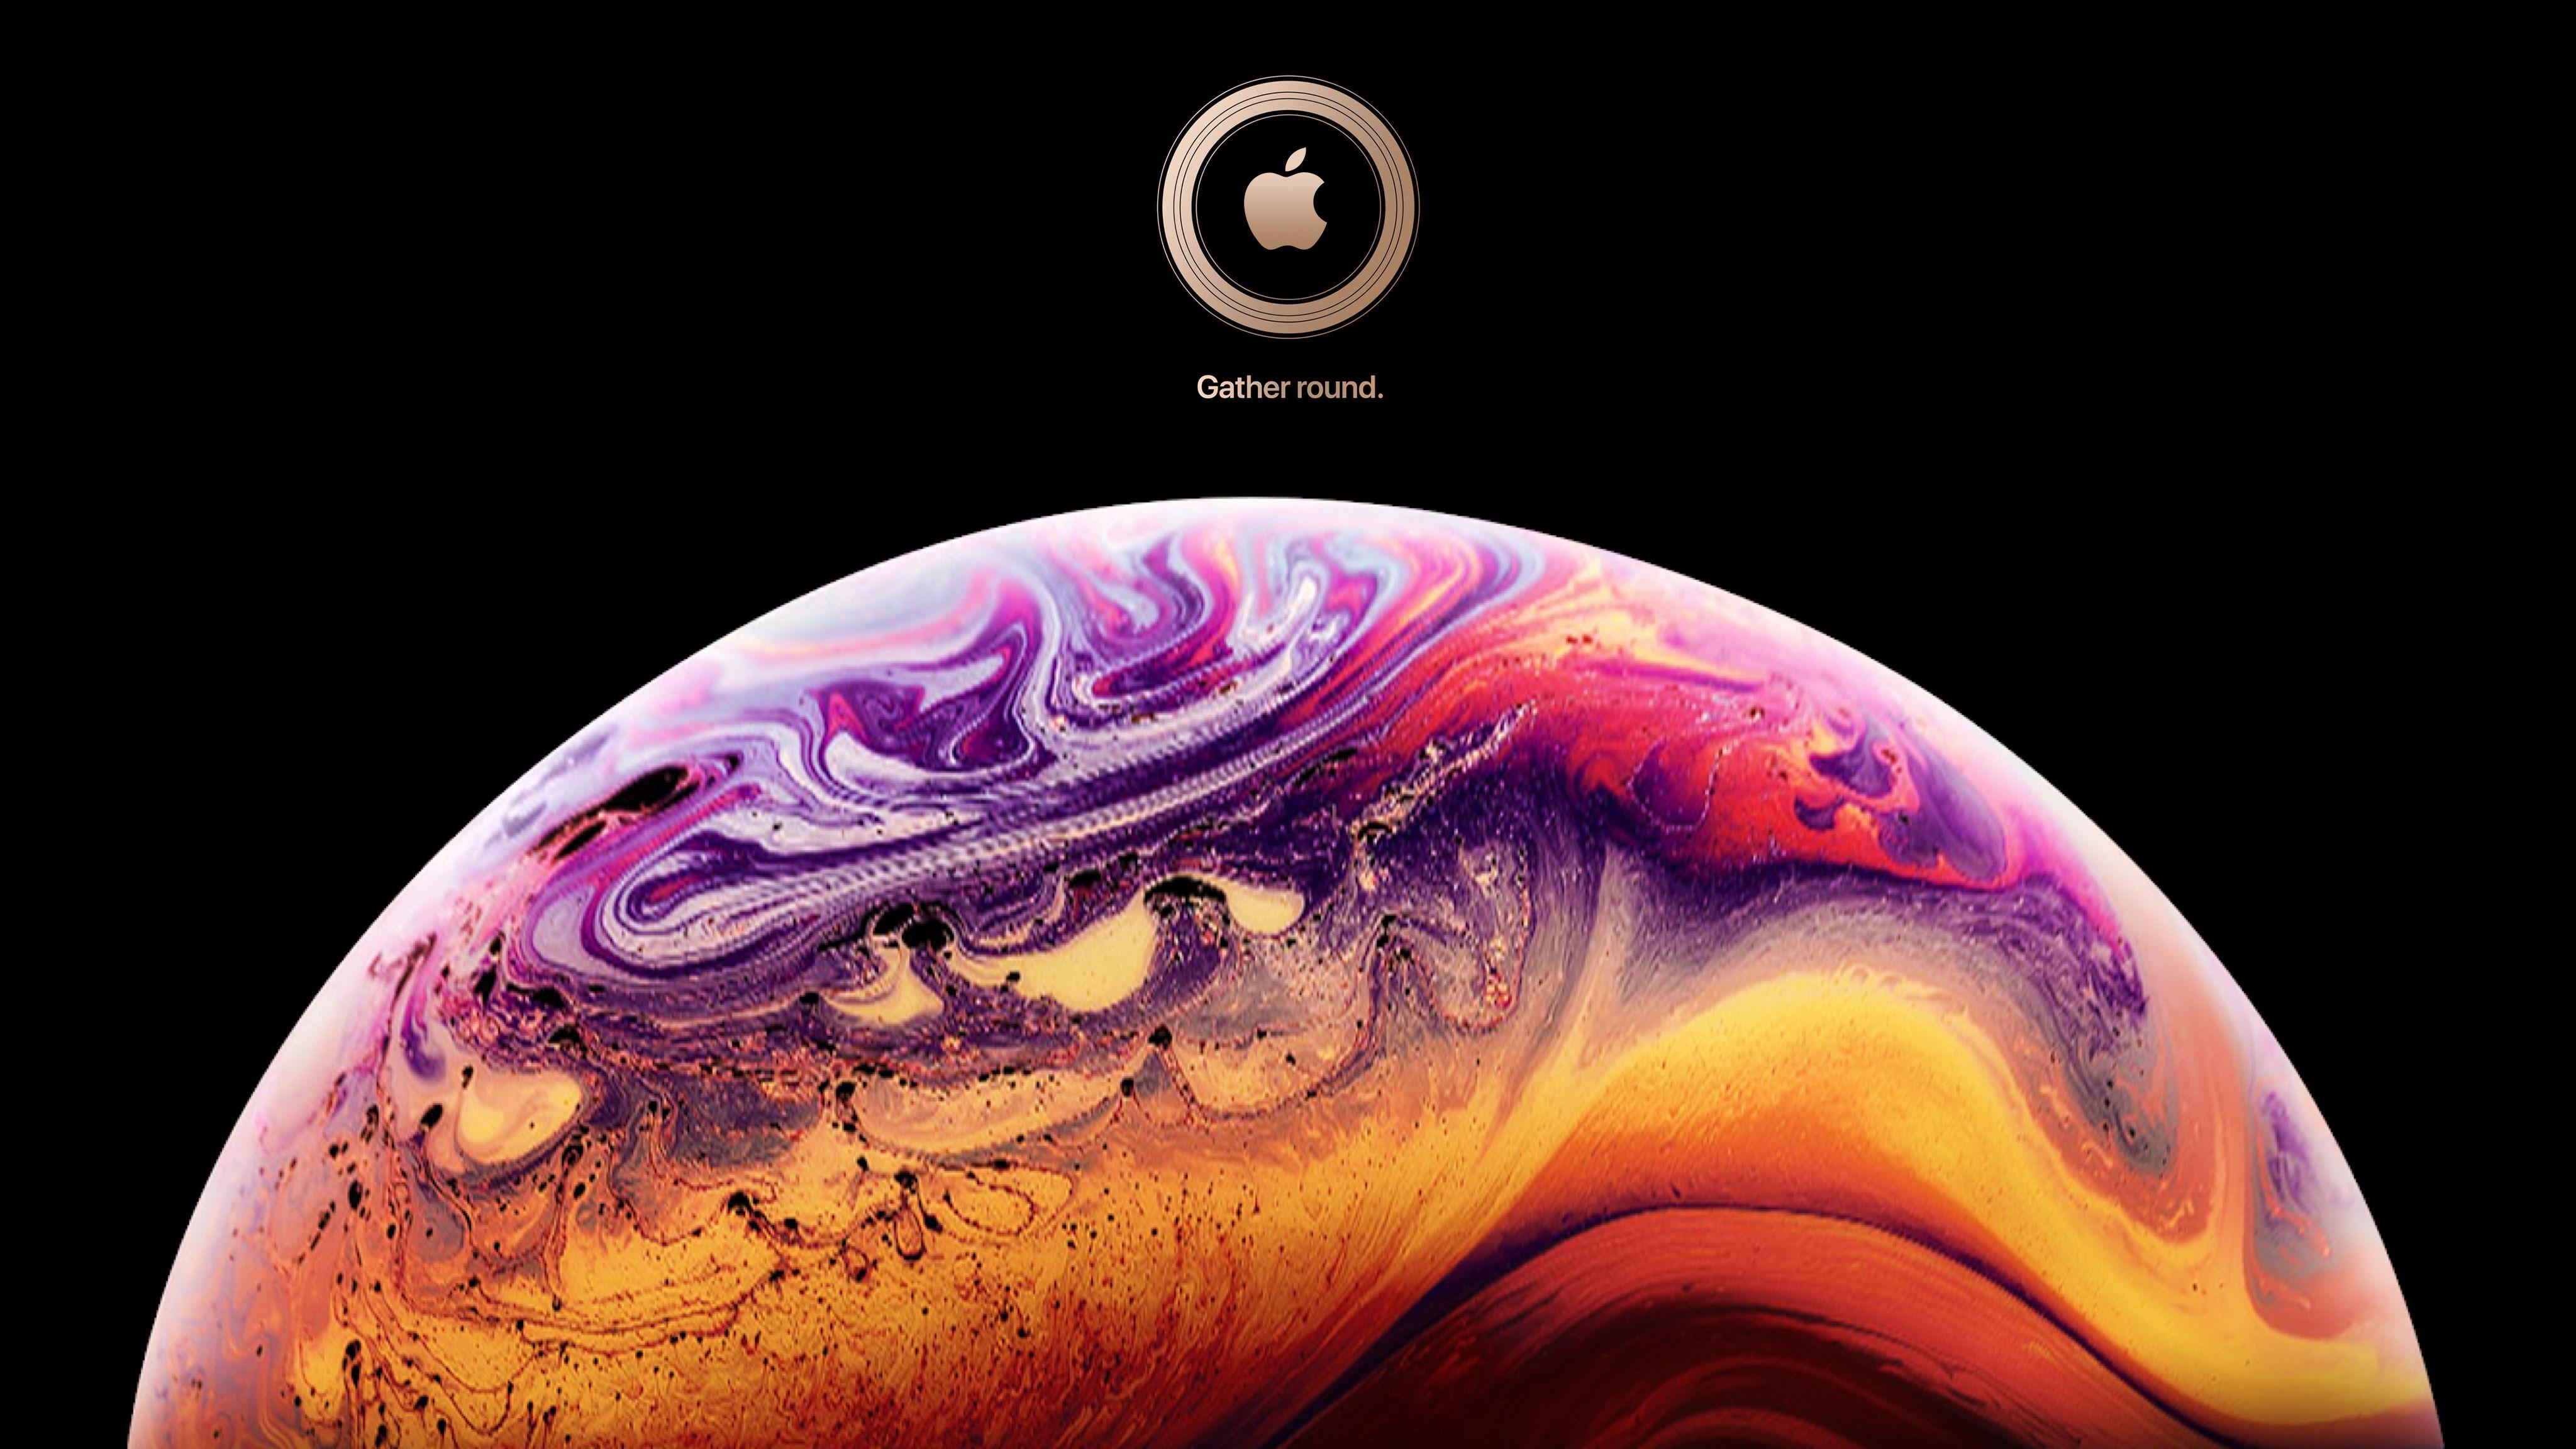 Iphone xs k wallpapers